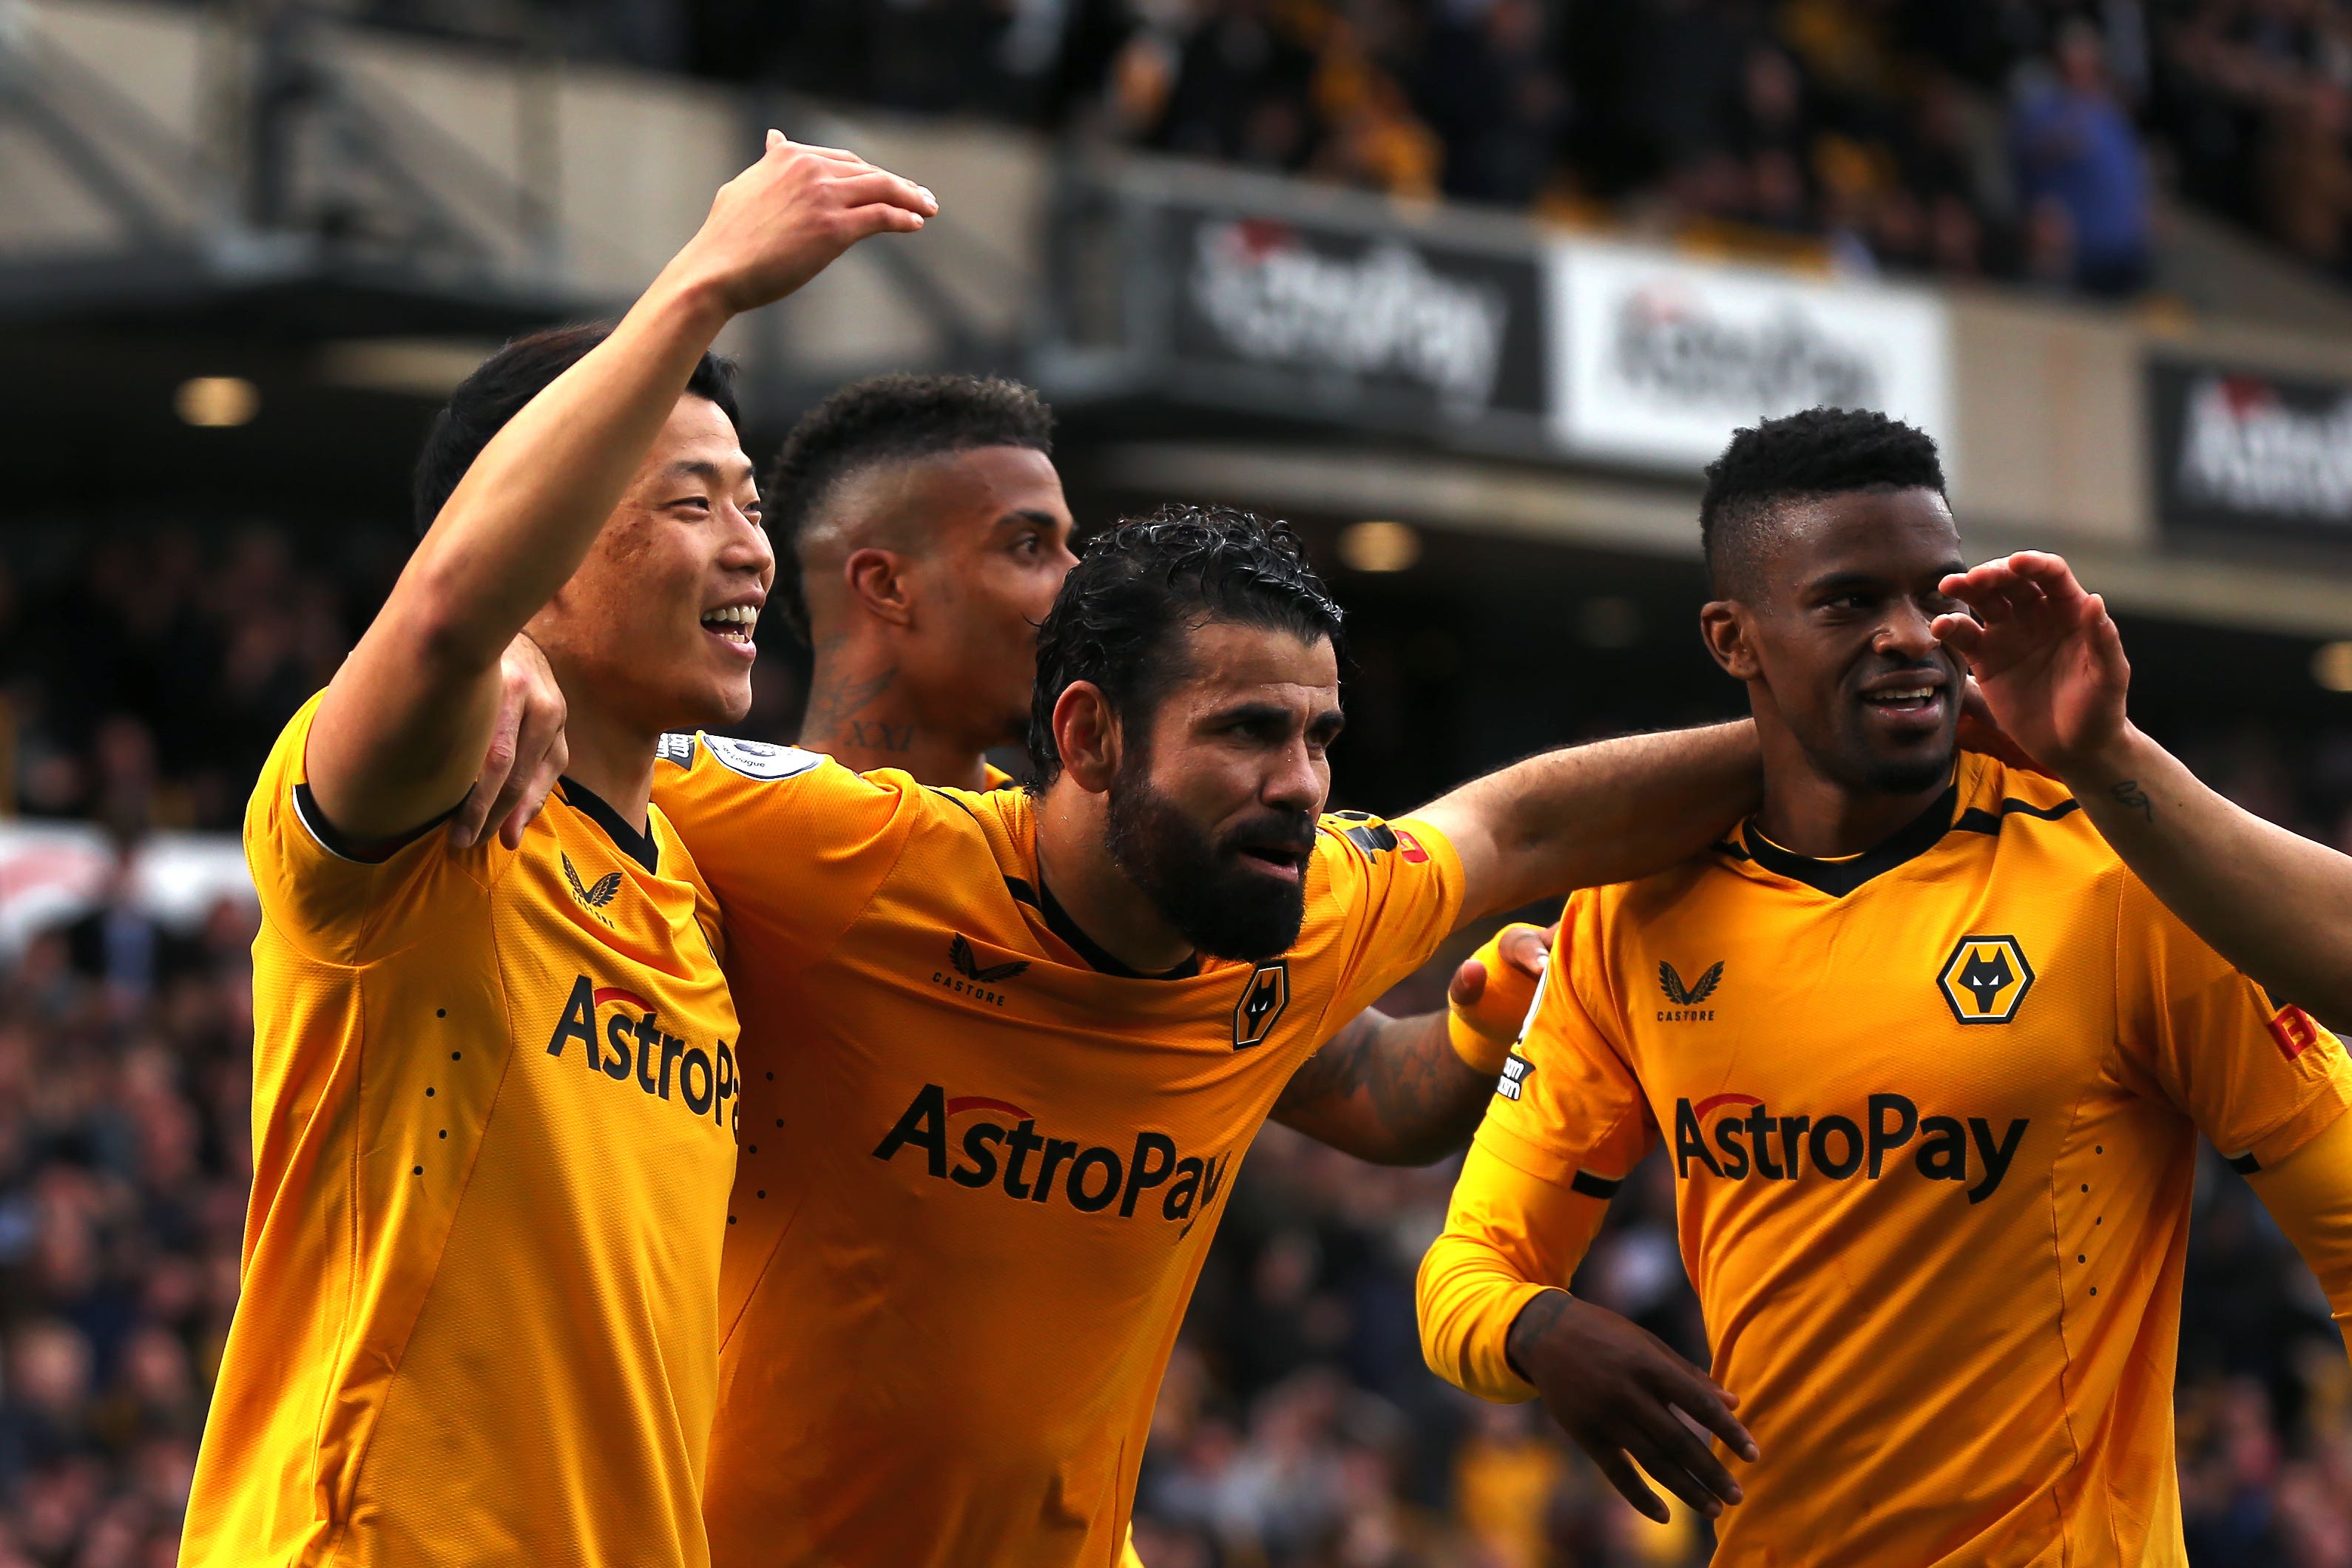 Wolves celebrate their second goal against Brentford (Barrington Coombs/PA)